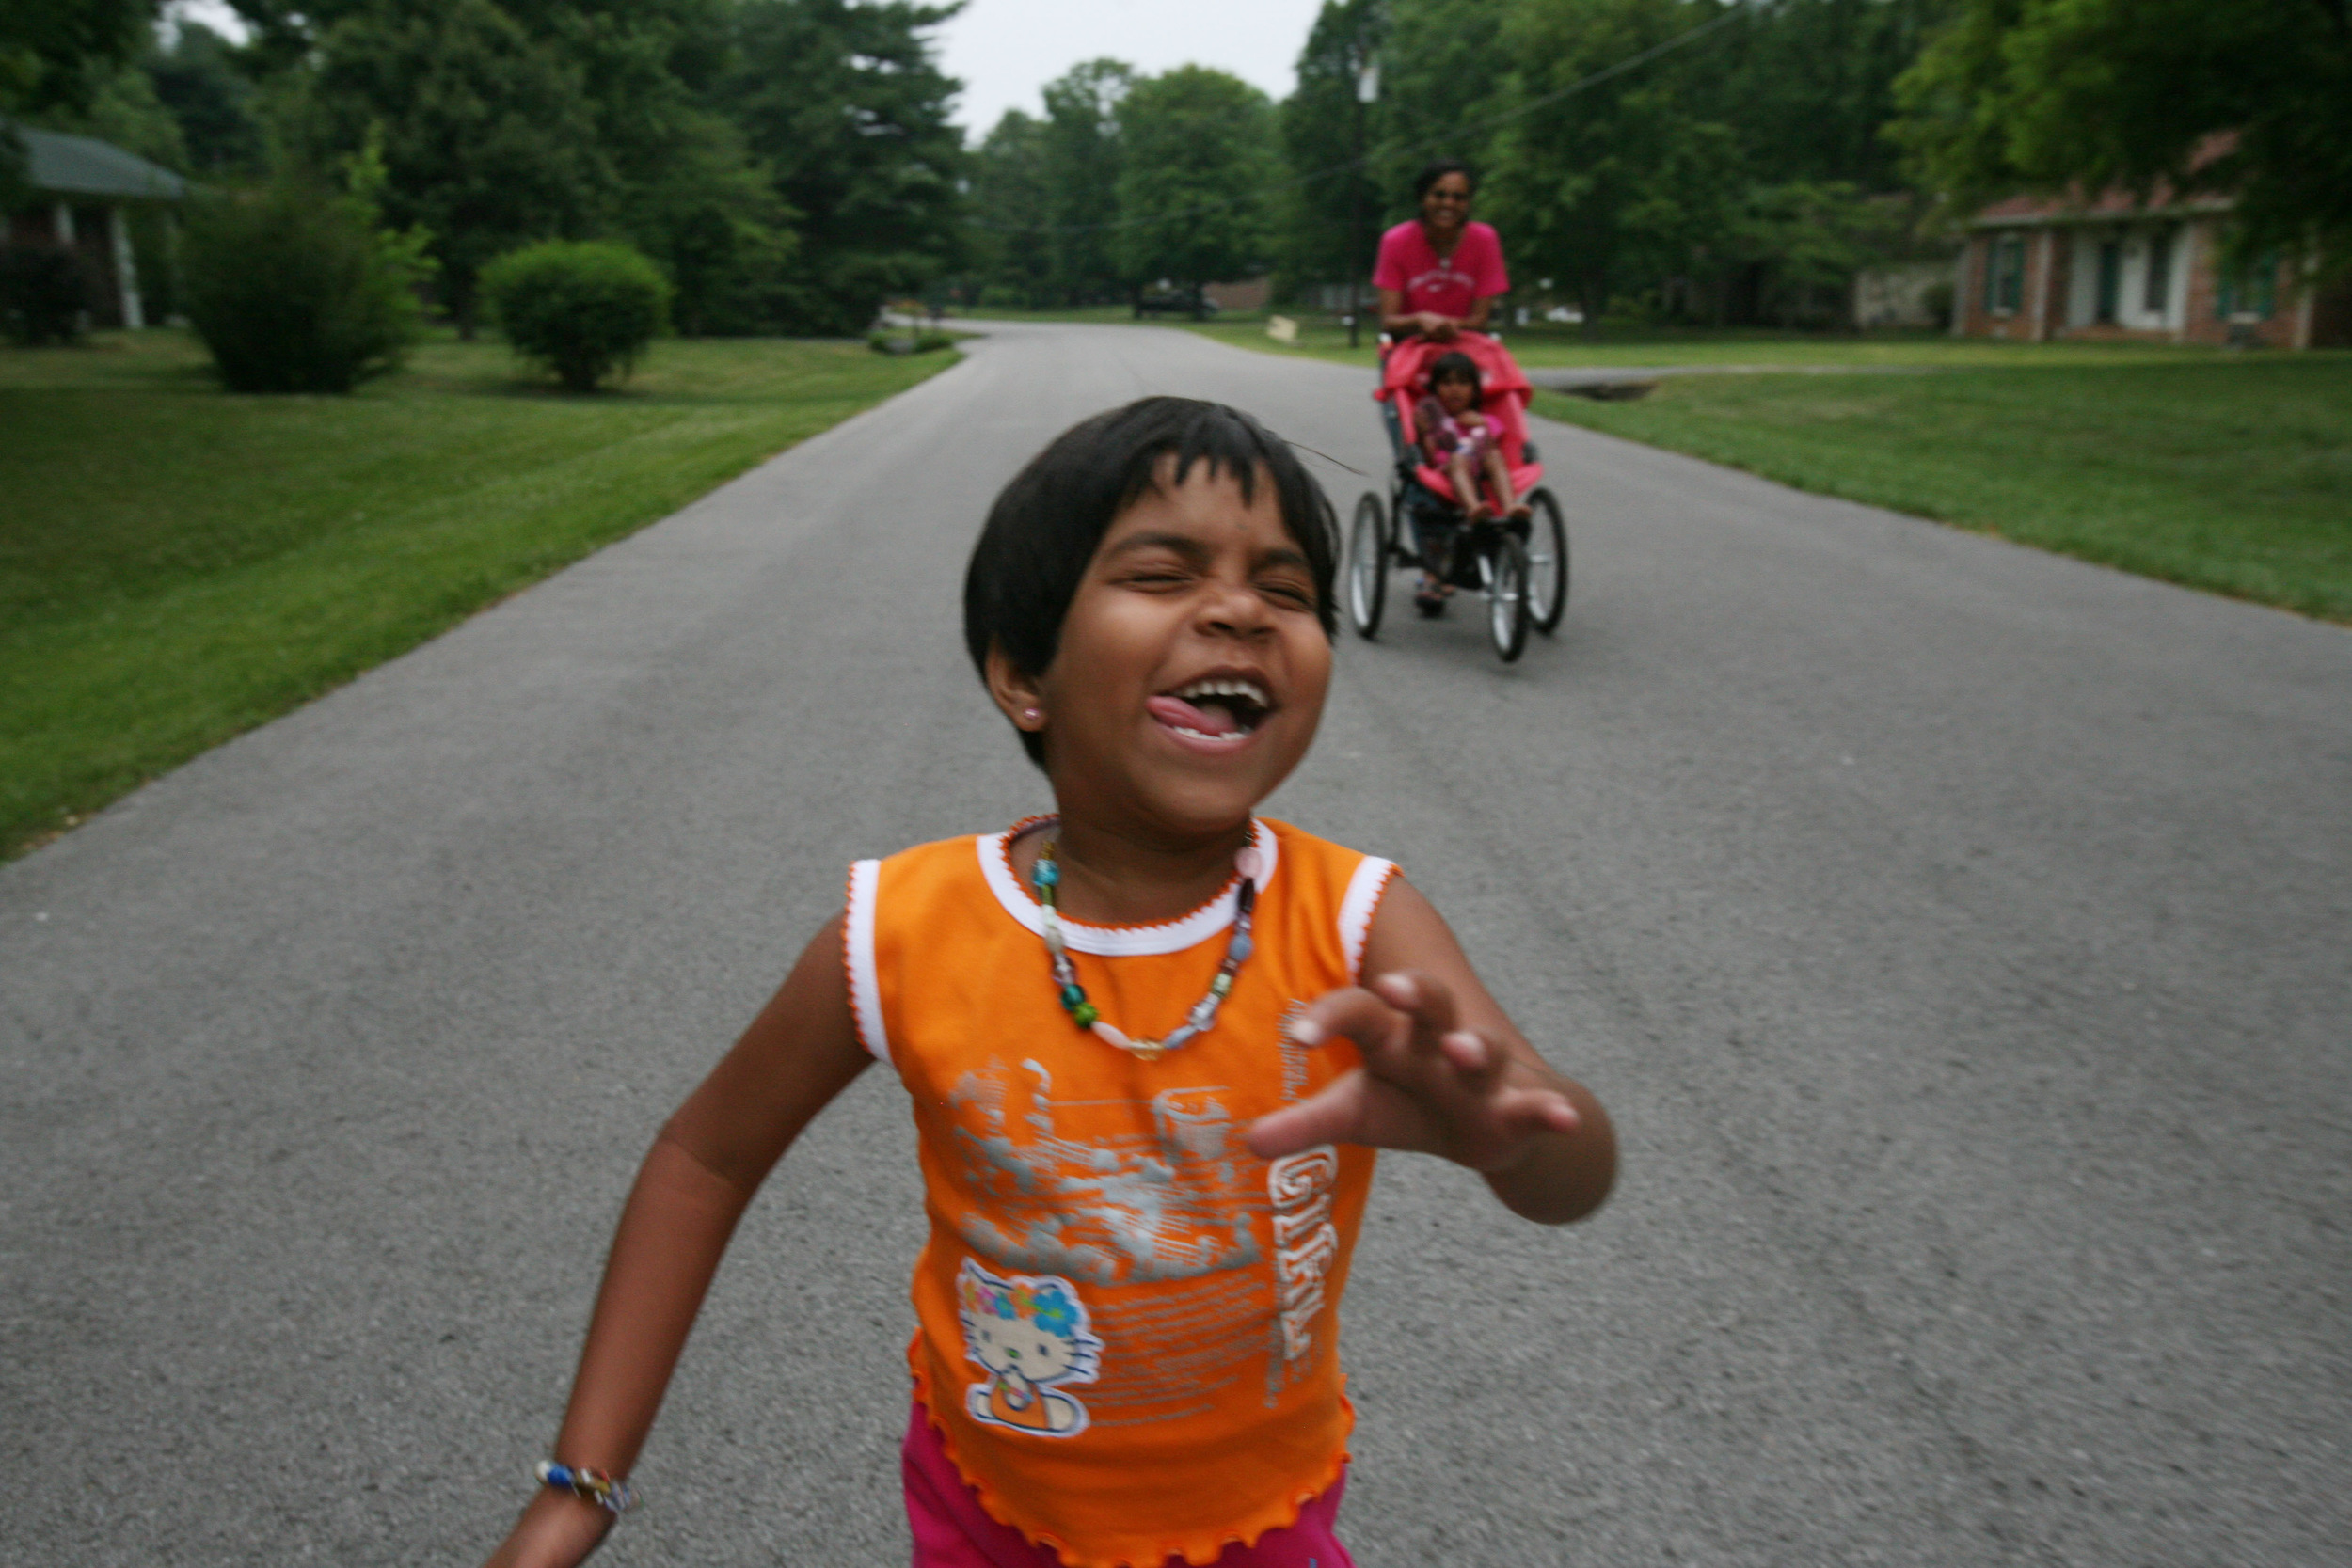  Kajal laughs as she runs down the middle of a quiet suburban street in Franklin, Tenn Wednesday, May 30, 2007. Despite the twists and turns of her difficult life, Kajal can be an exuberant and fearless child. 